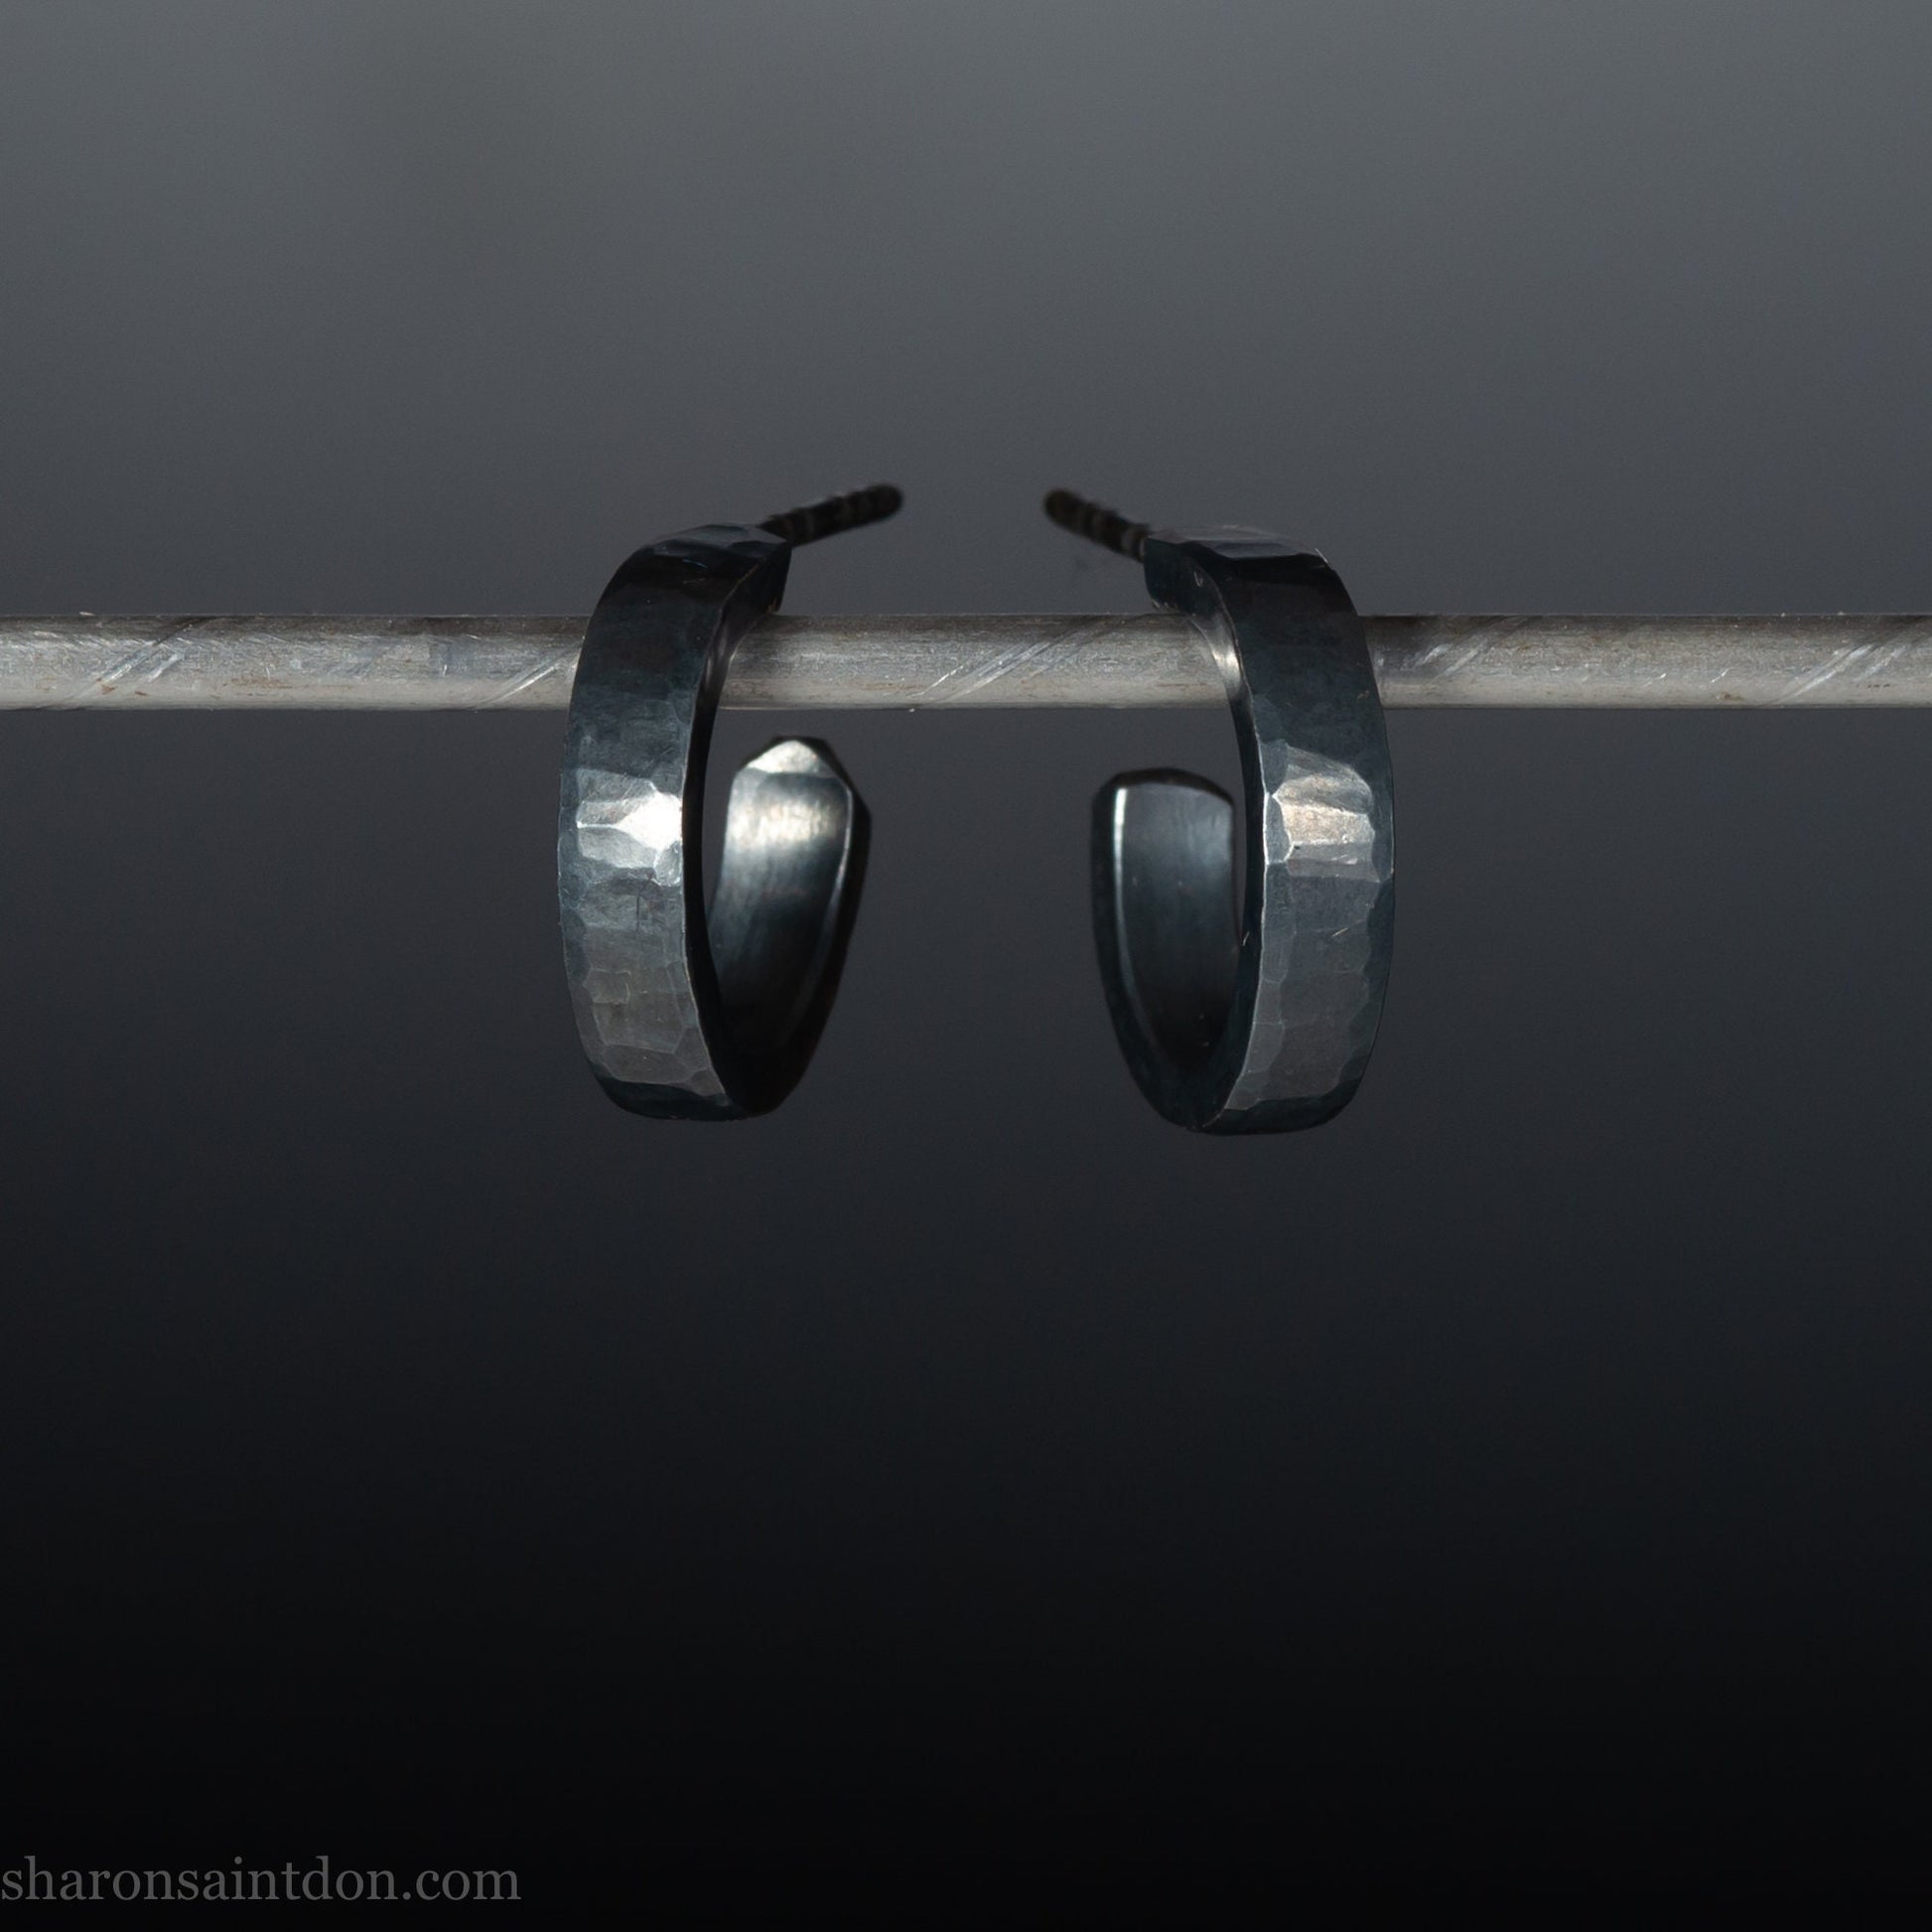 16mm x 3mm wide, handmade 925 sterling silver hoop earrings for men or women. Hammered texture, oxidized black earrings by Sharon SaintDon in North America.